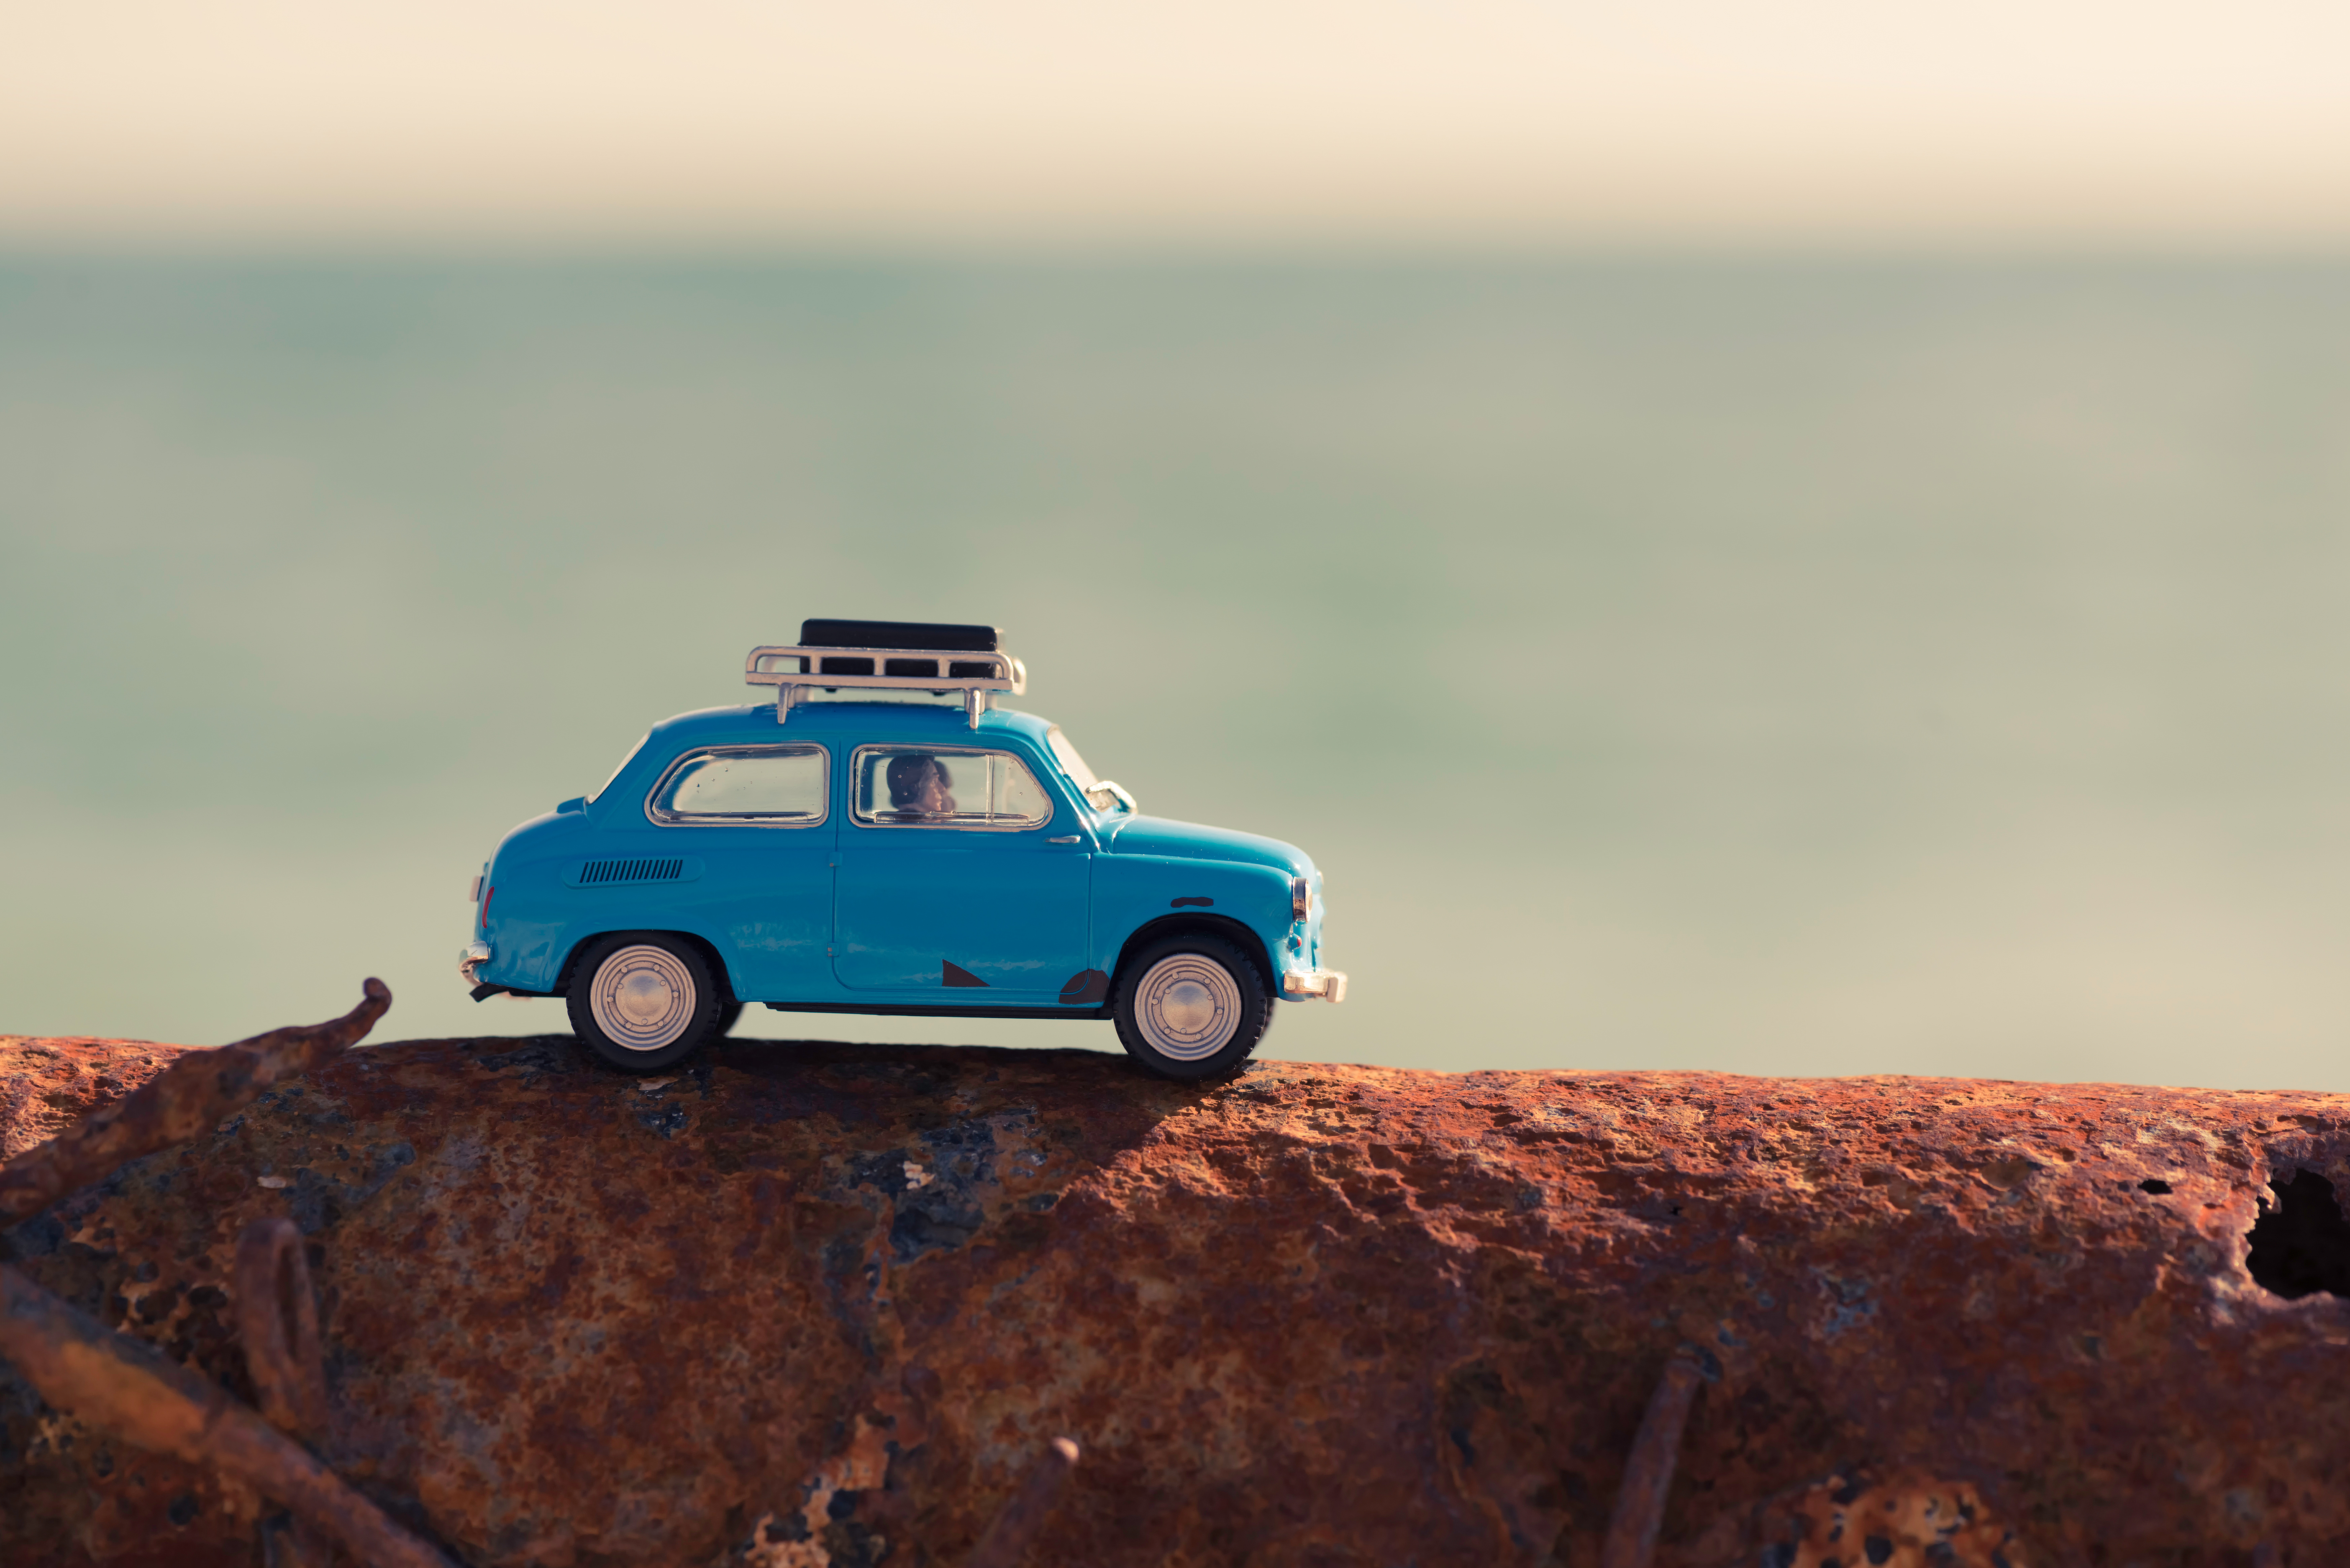 Vintage car parked near the sea. Travel and adventure concept